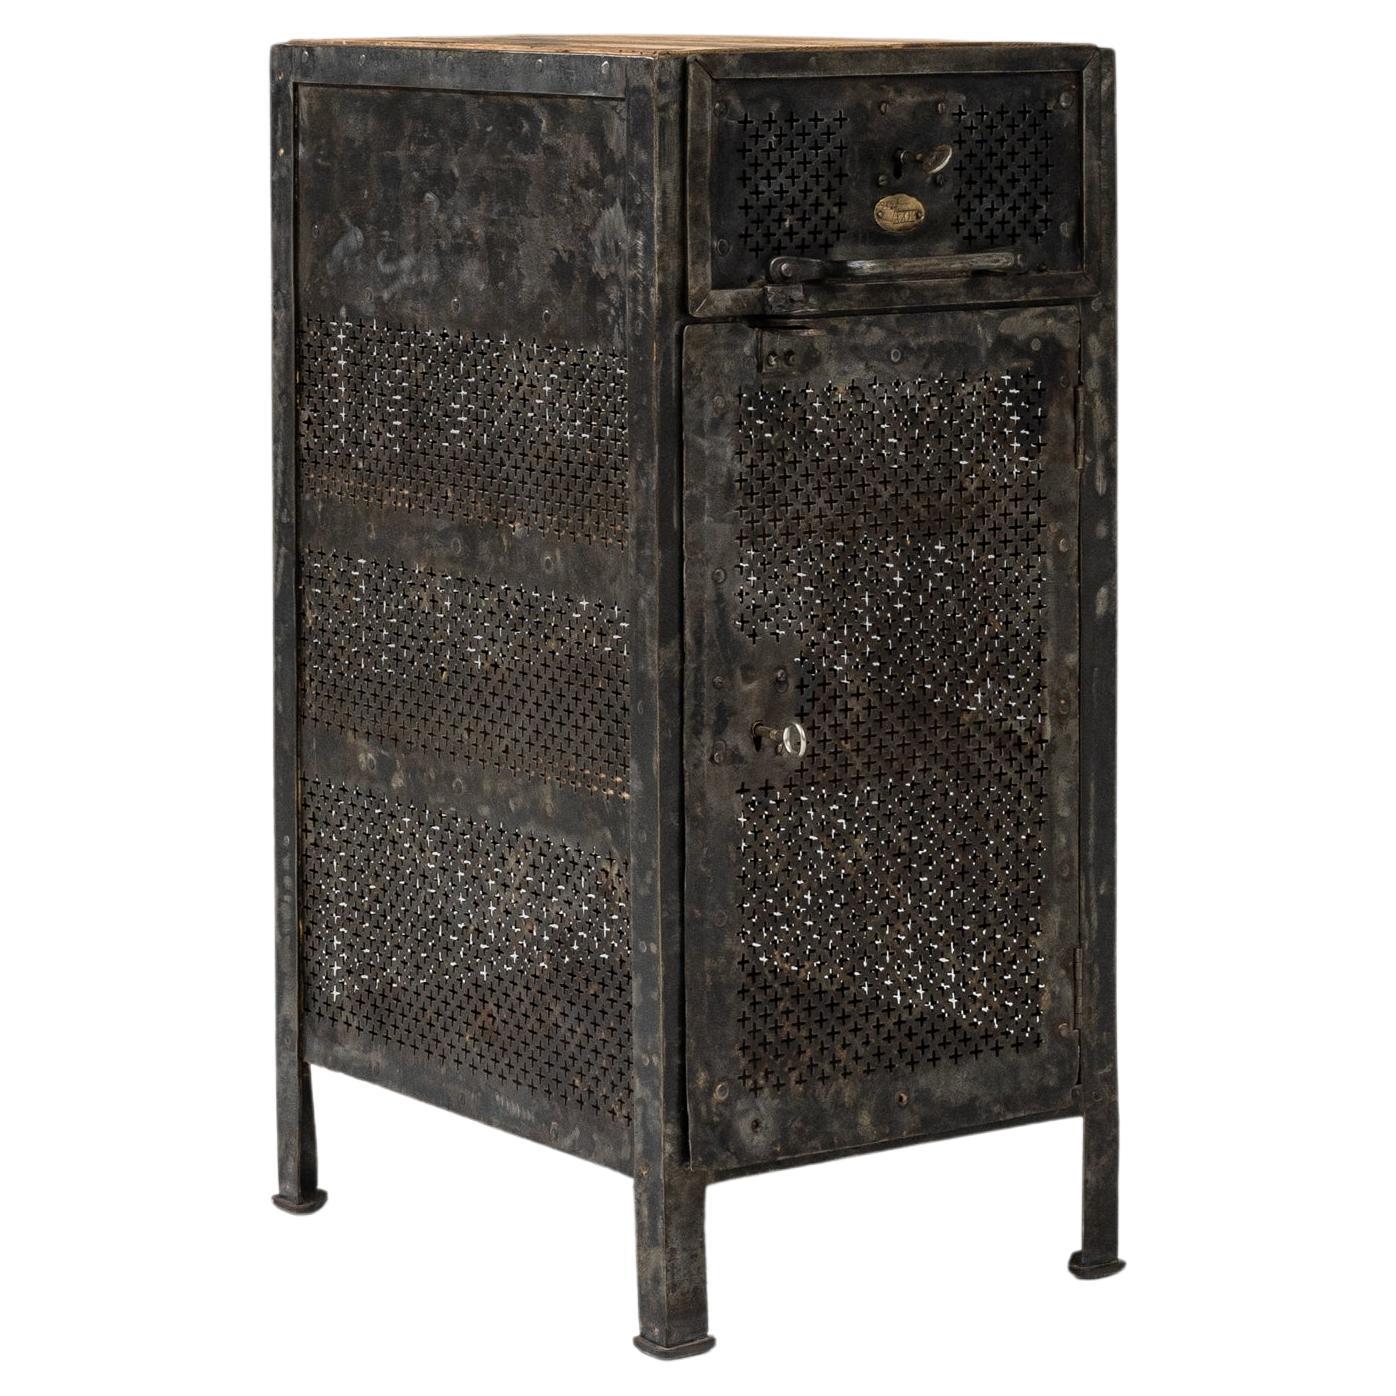 Early 20th Century French Metal Bedside Table With Wooden Top For Sale